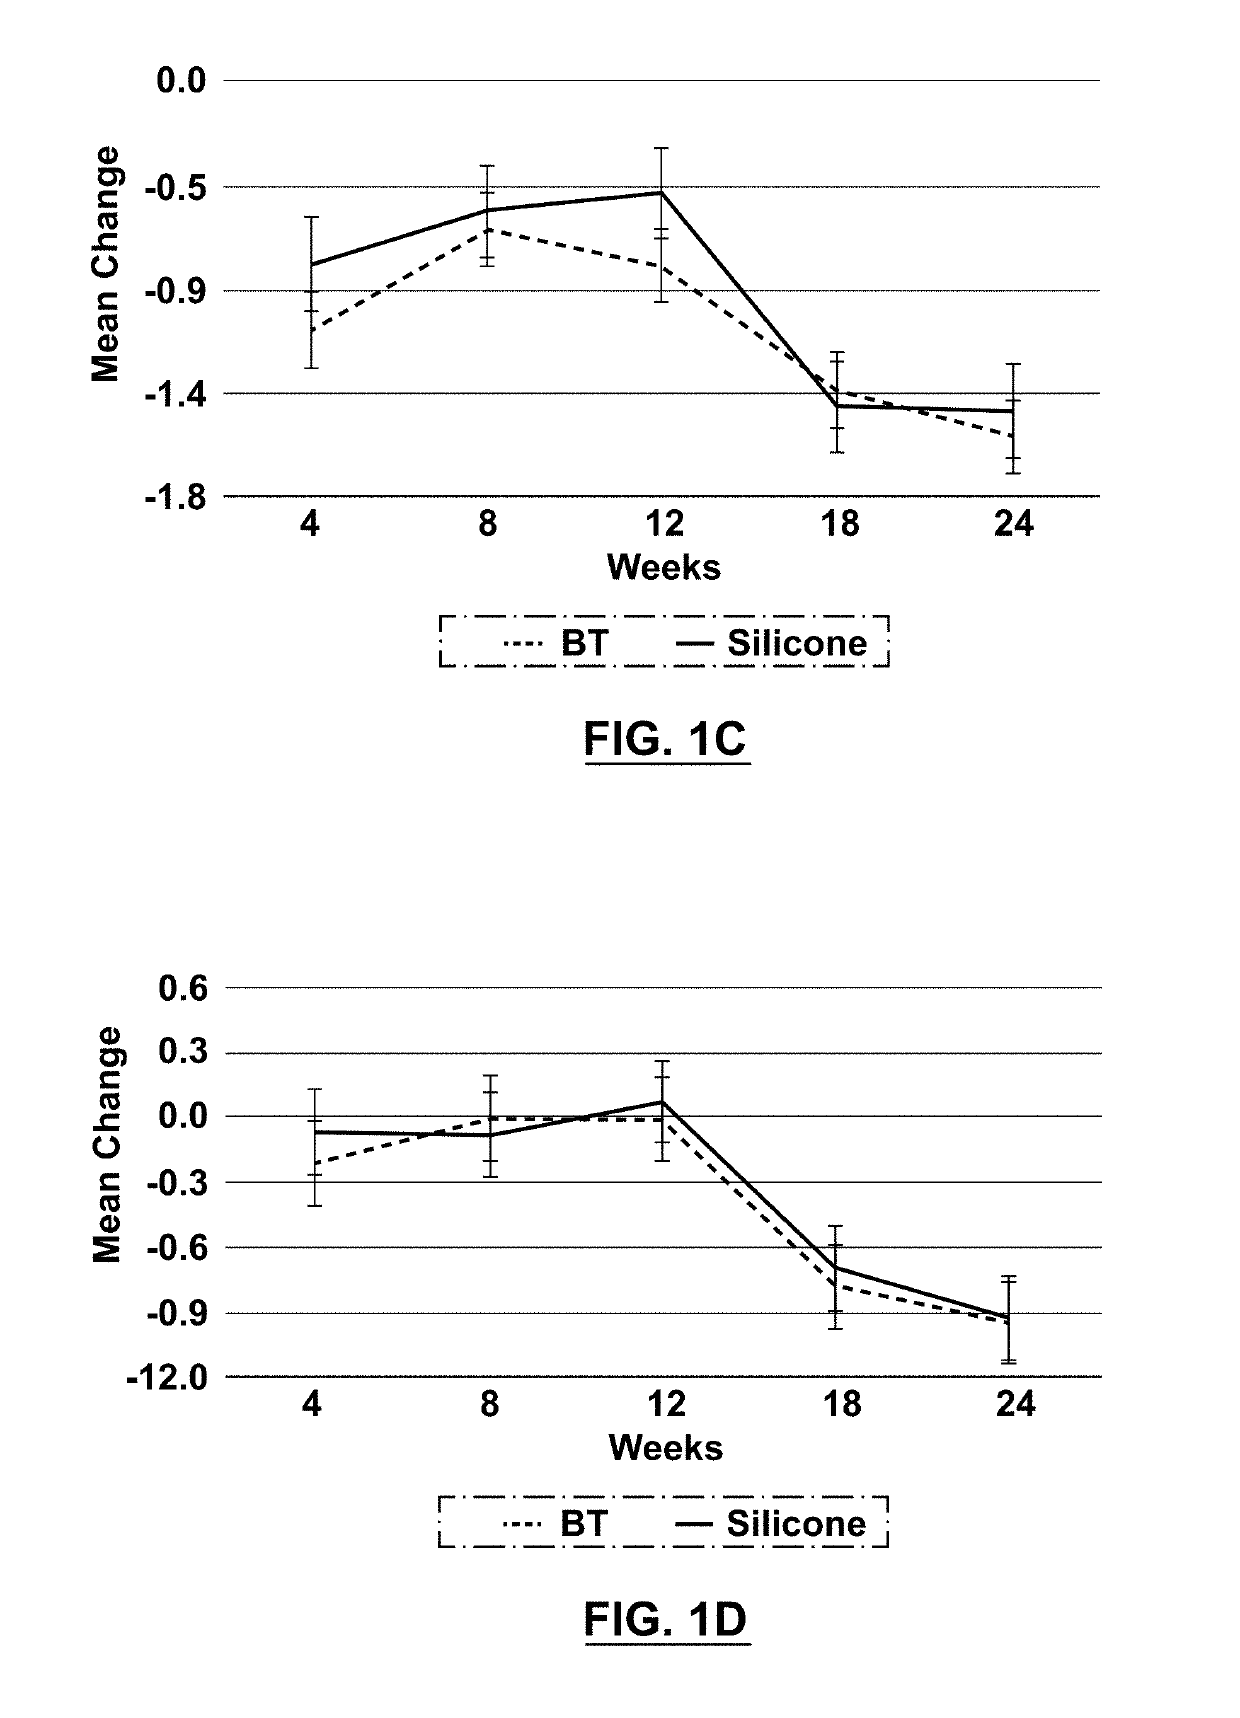 Biophotonic compositions and methods for reducing scarring